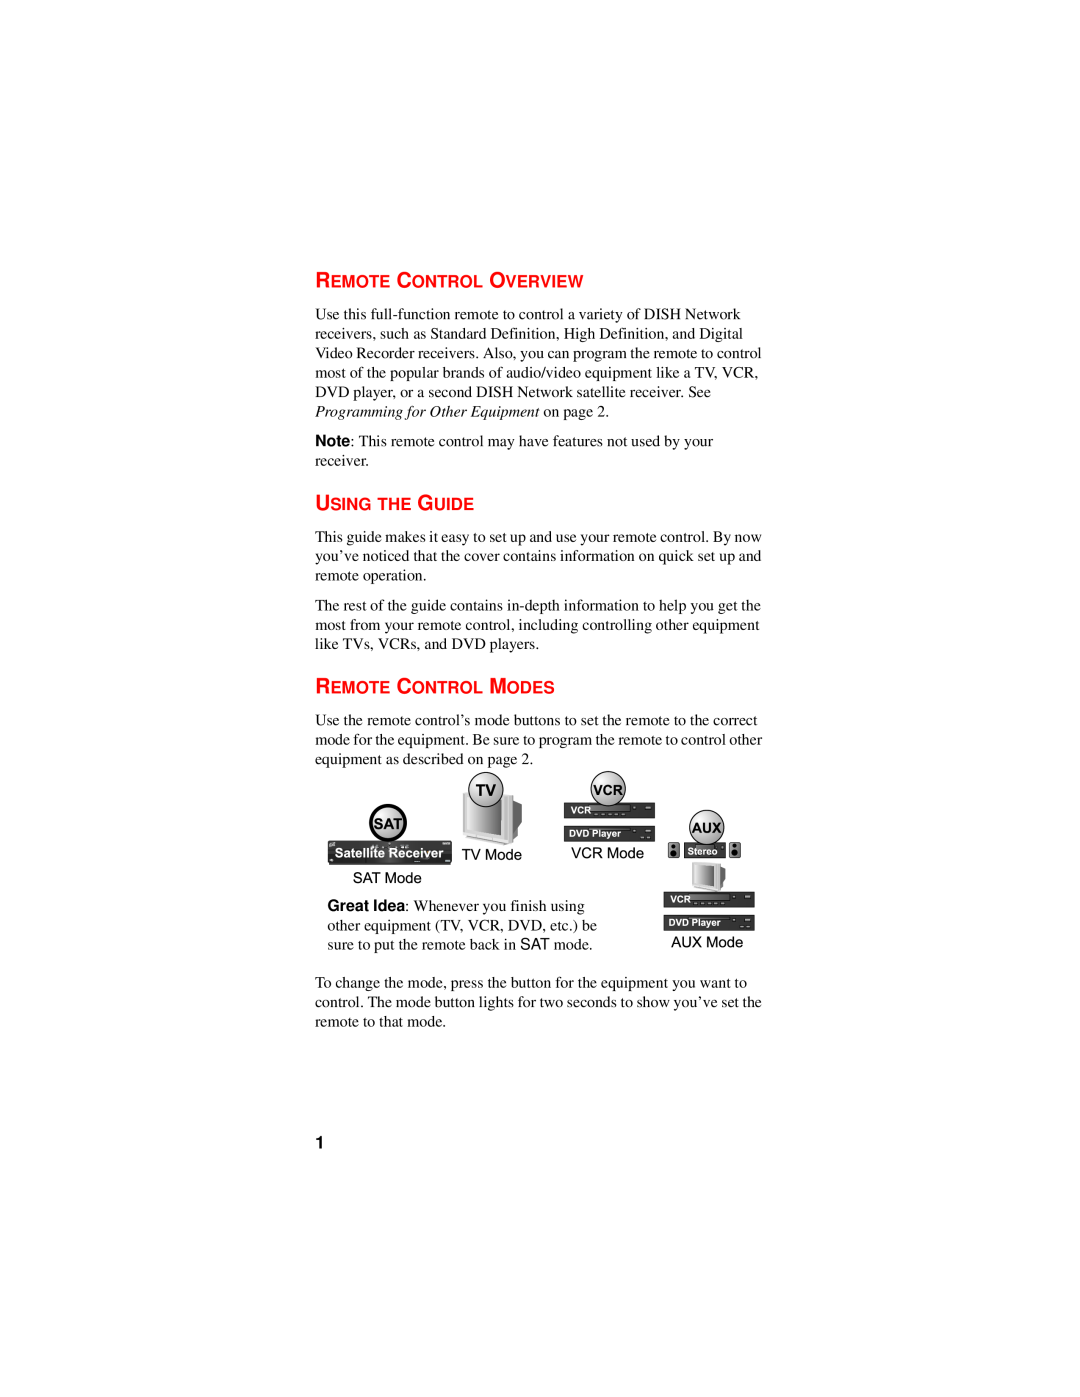 Dish Network 6.3 manual Remote Control Overview, Using The Guide, Remote Control Modes 